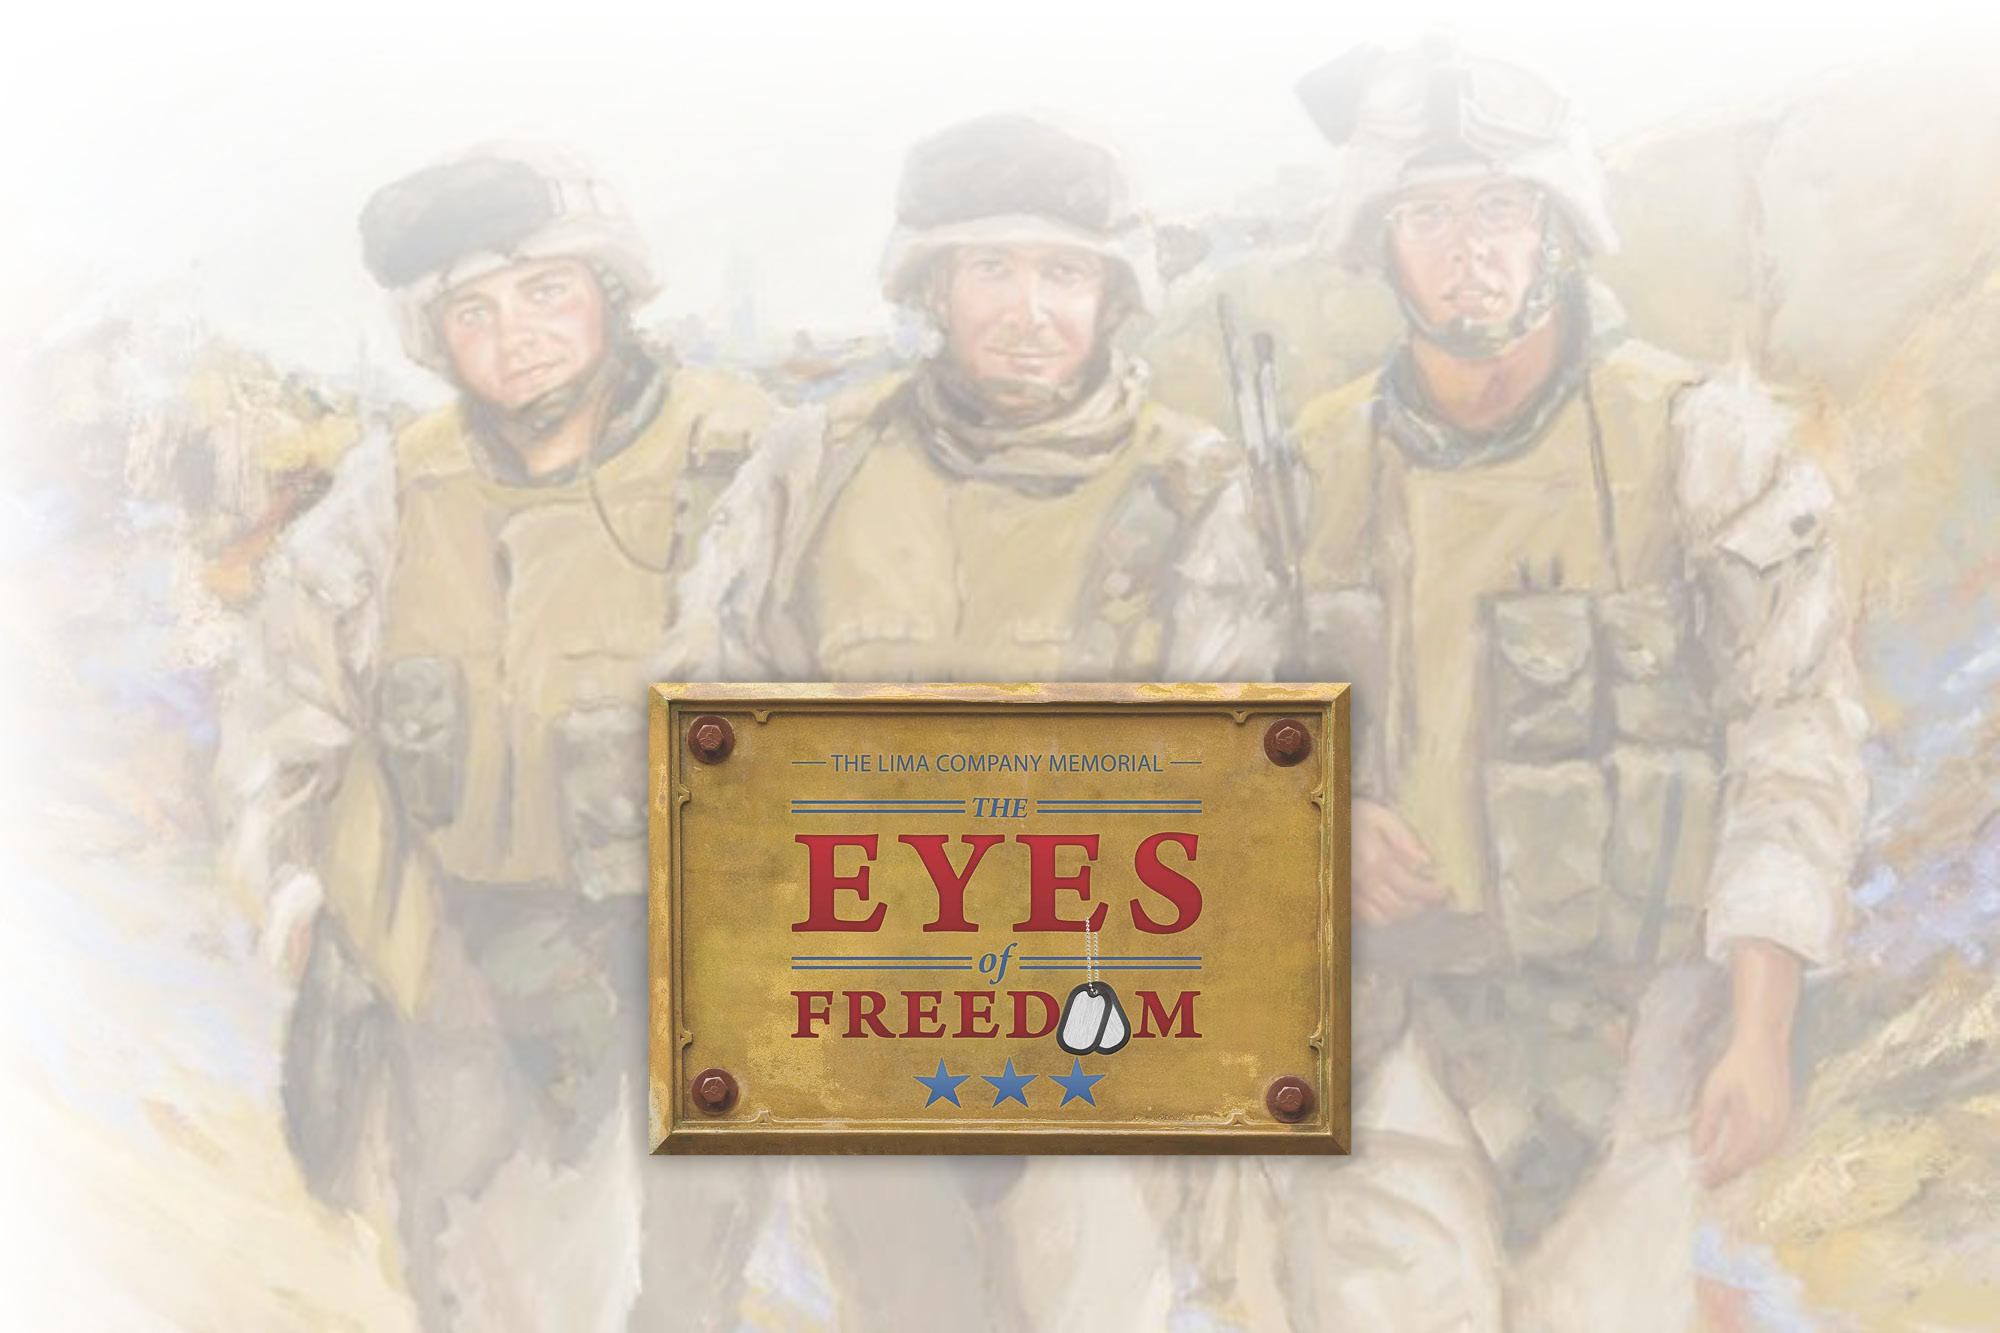 Image for "Eyes of Freedom" press release.